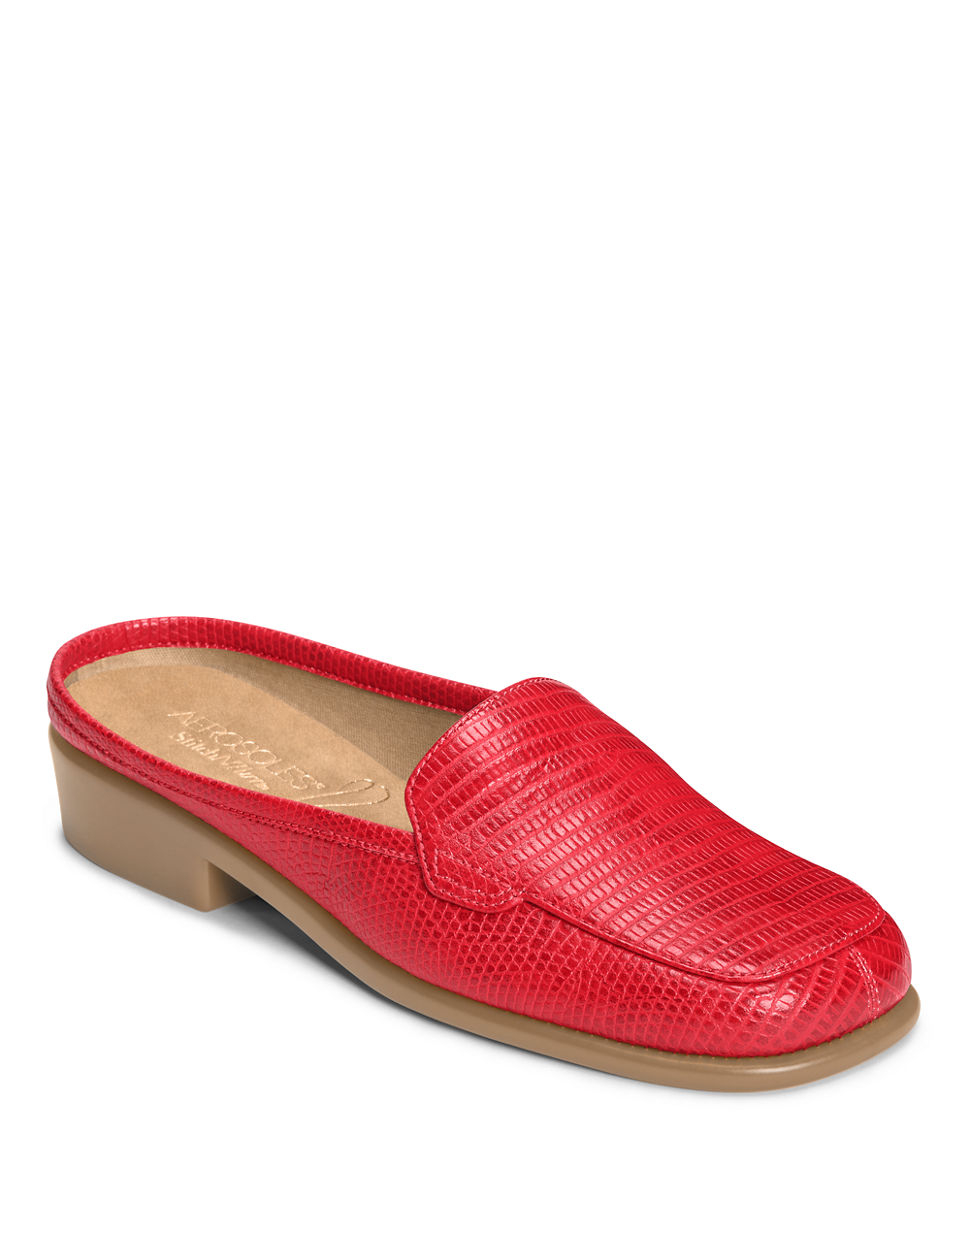 Aerosoles Duble Down Croc Printed Slides in Red (Light Red) | Lyst